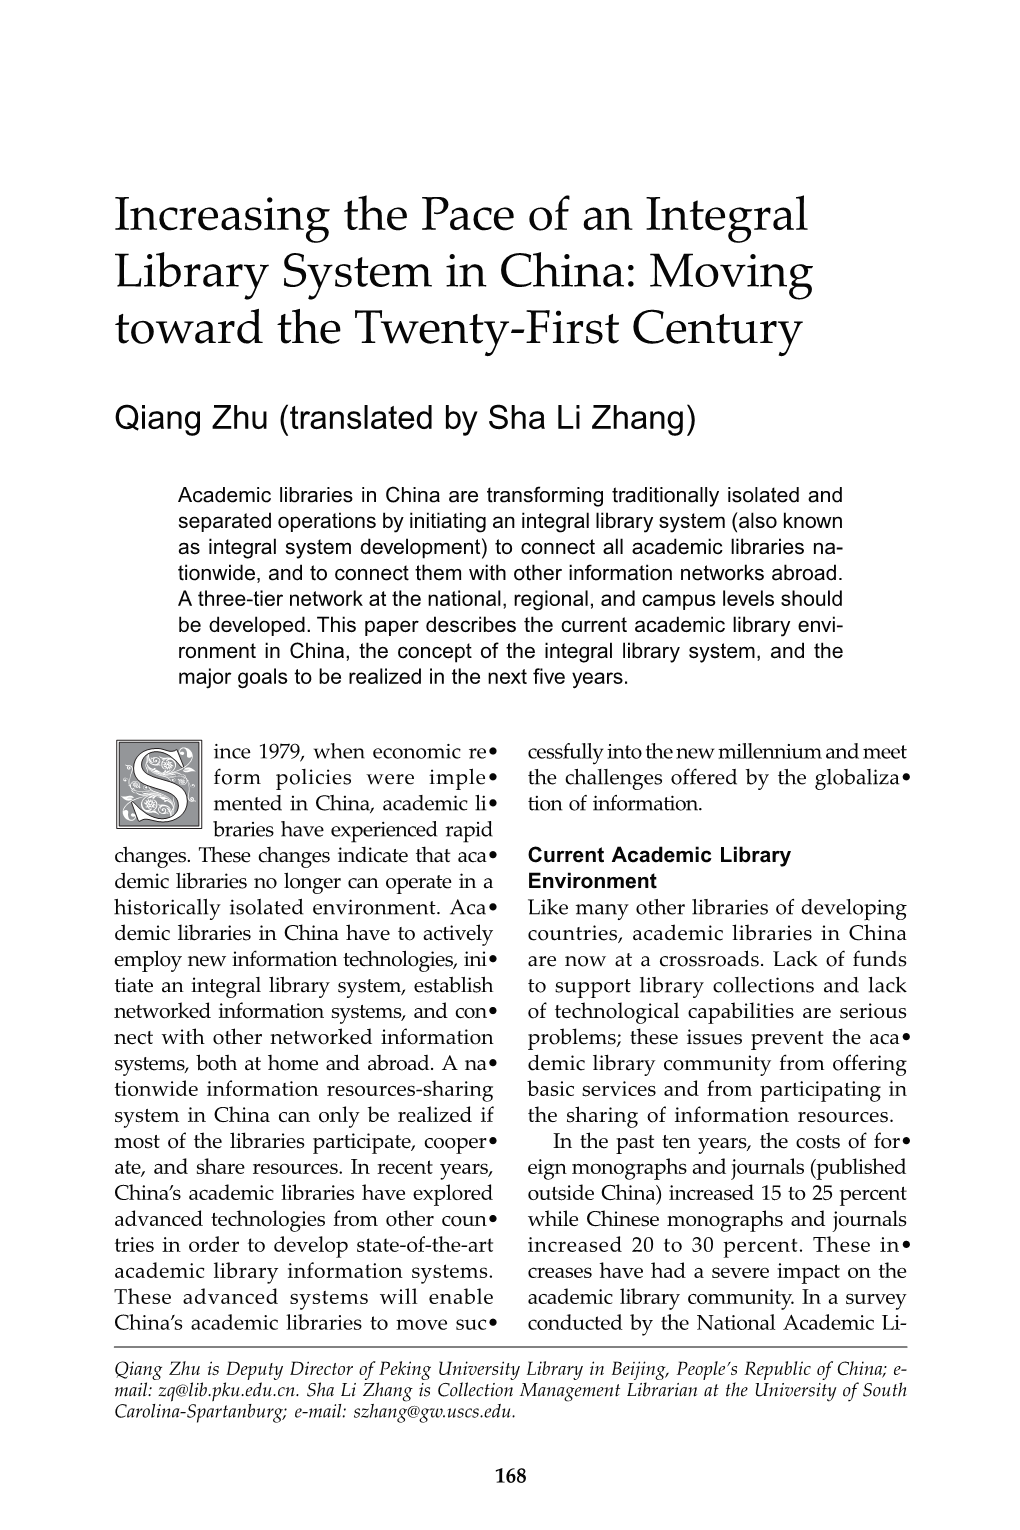 Increasing the Pace of an Integral Library System in China: Moving Toward the Twenty-First Century